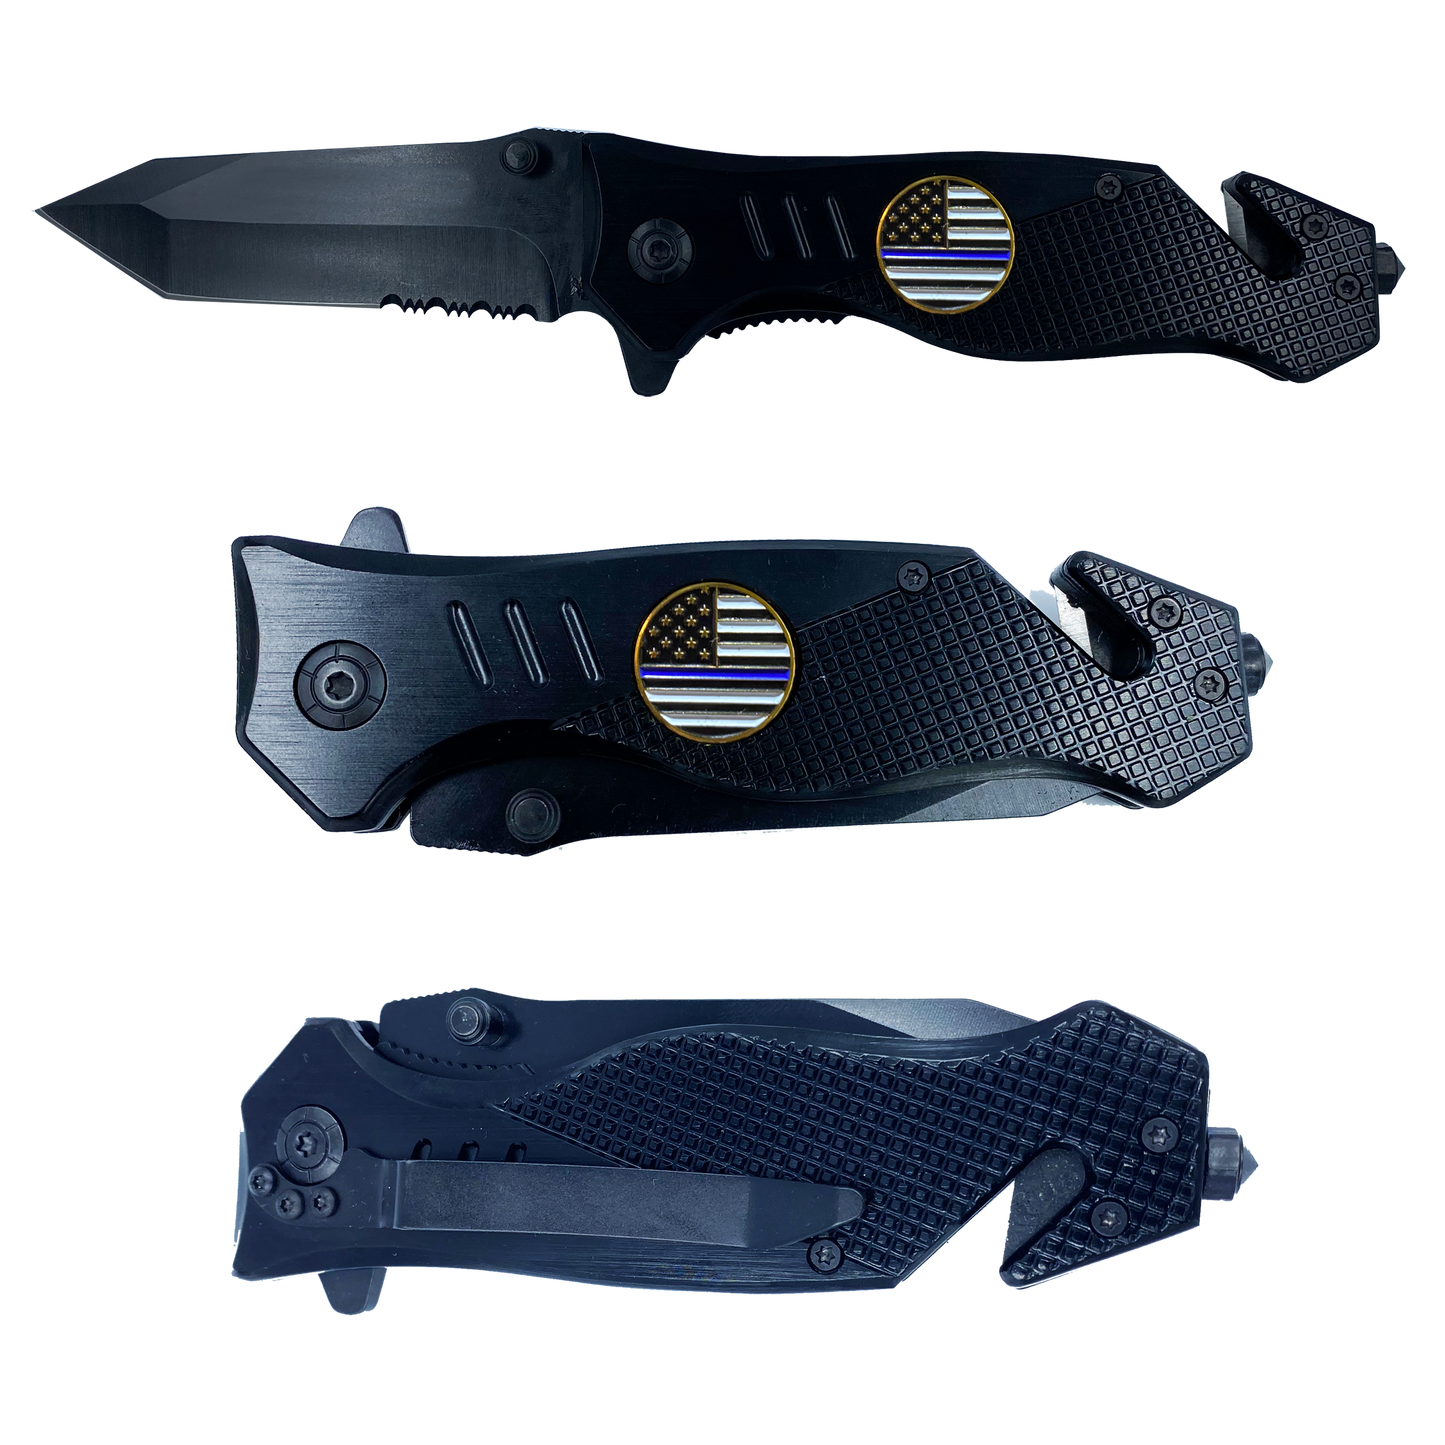 Thin Blue Line 3-in-1 Tactical Rescue knife tool for Police Officers with Seatbelt Cutter Steel Serrated Blade Glass Breaker Deputy Sheriff